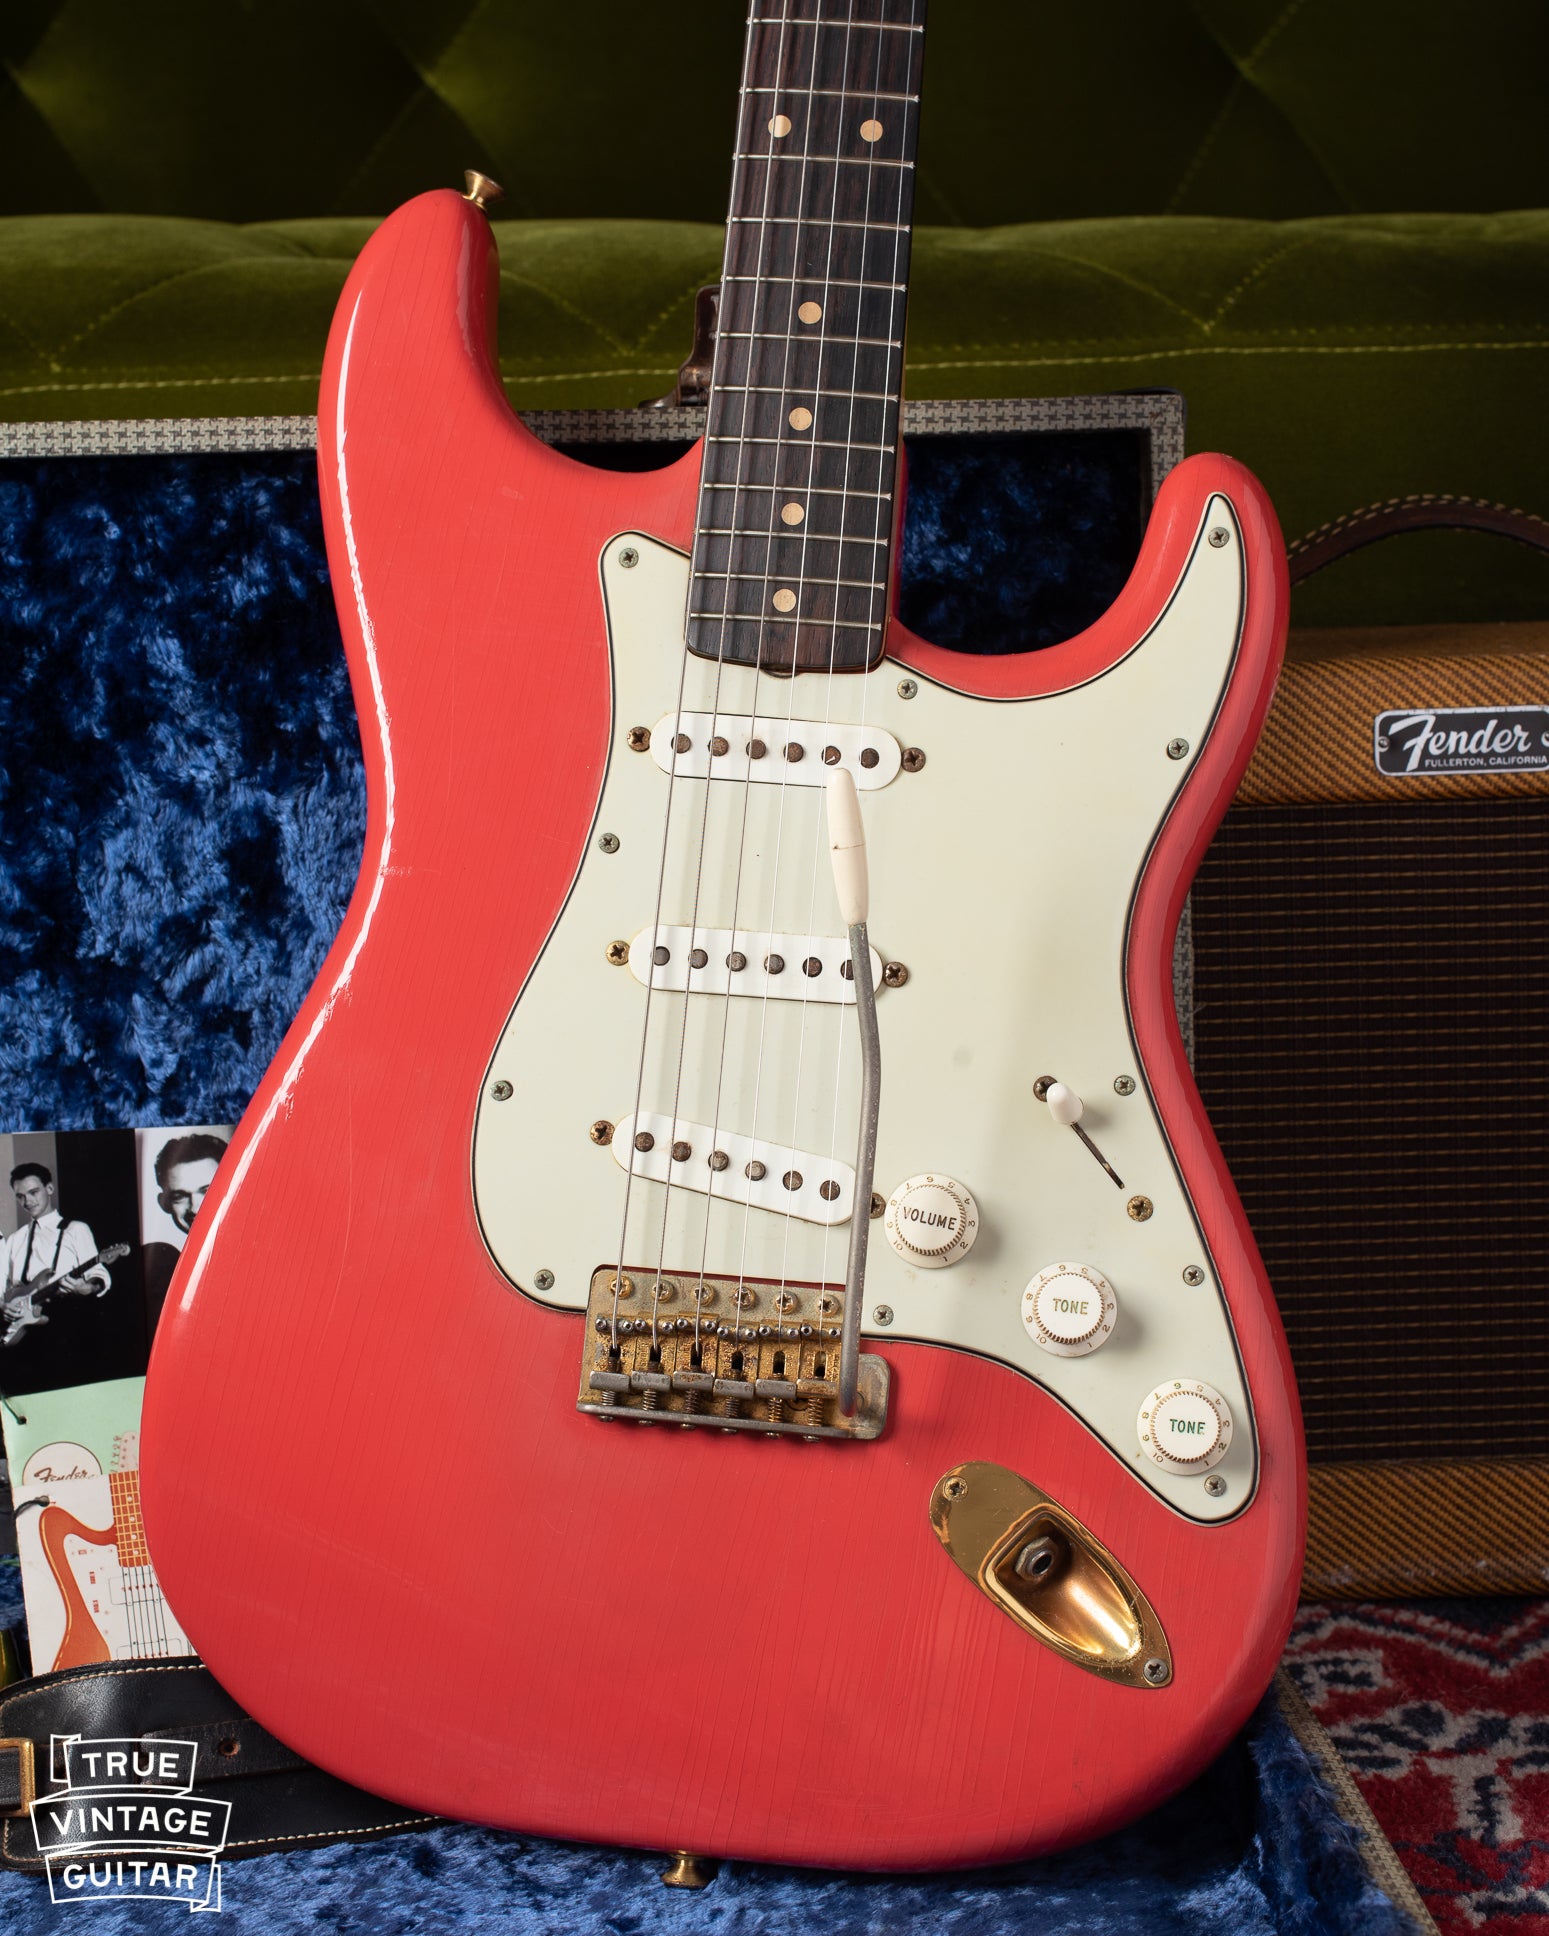 1962 Fender Stratocaster Red guitar with gold parts from South Africa